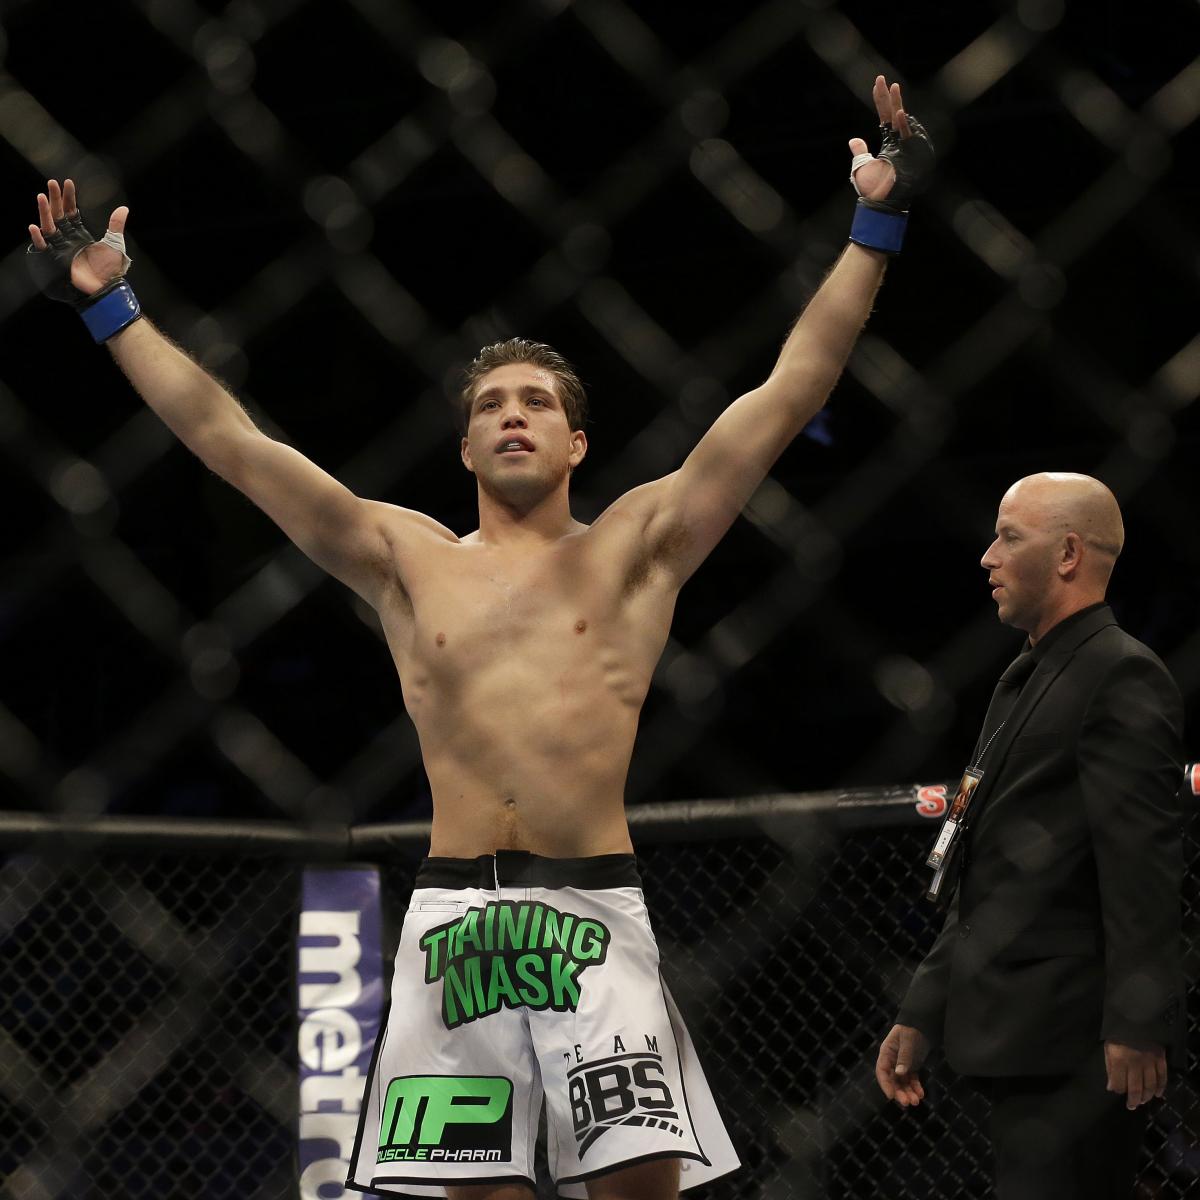 (Winner of Fundamental Event) and the Right Winners and Losers from UFC Battle Evening 180